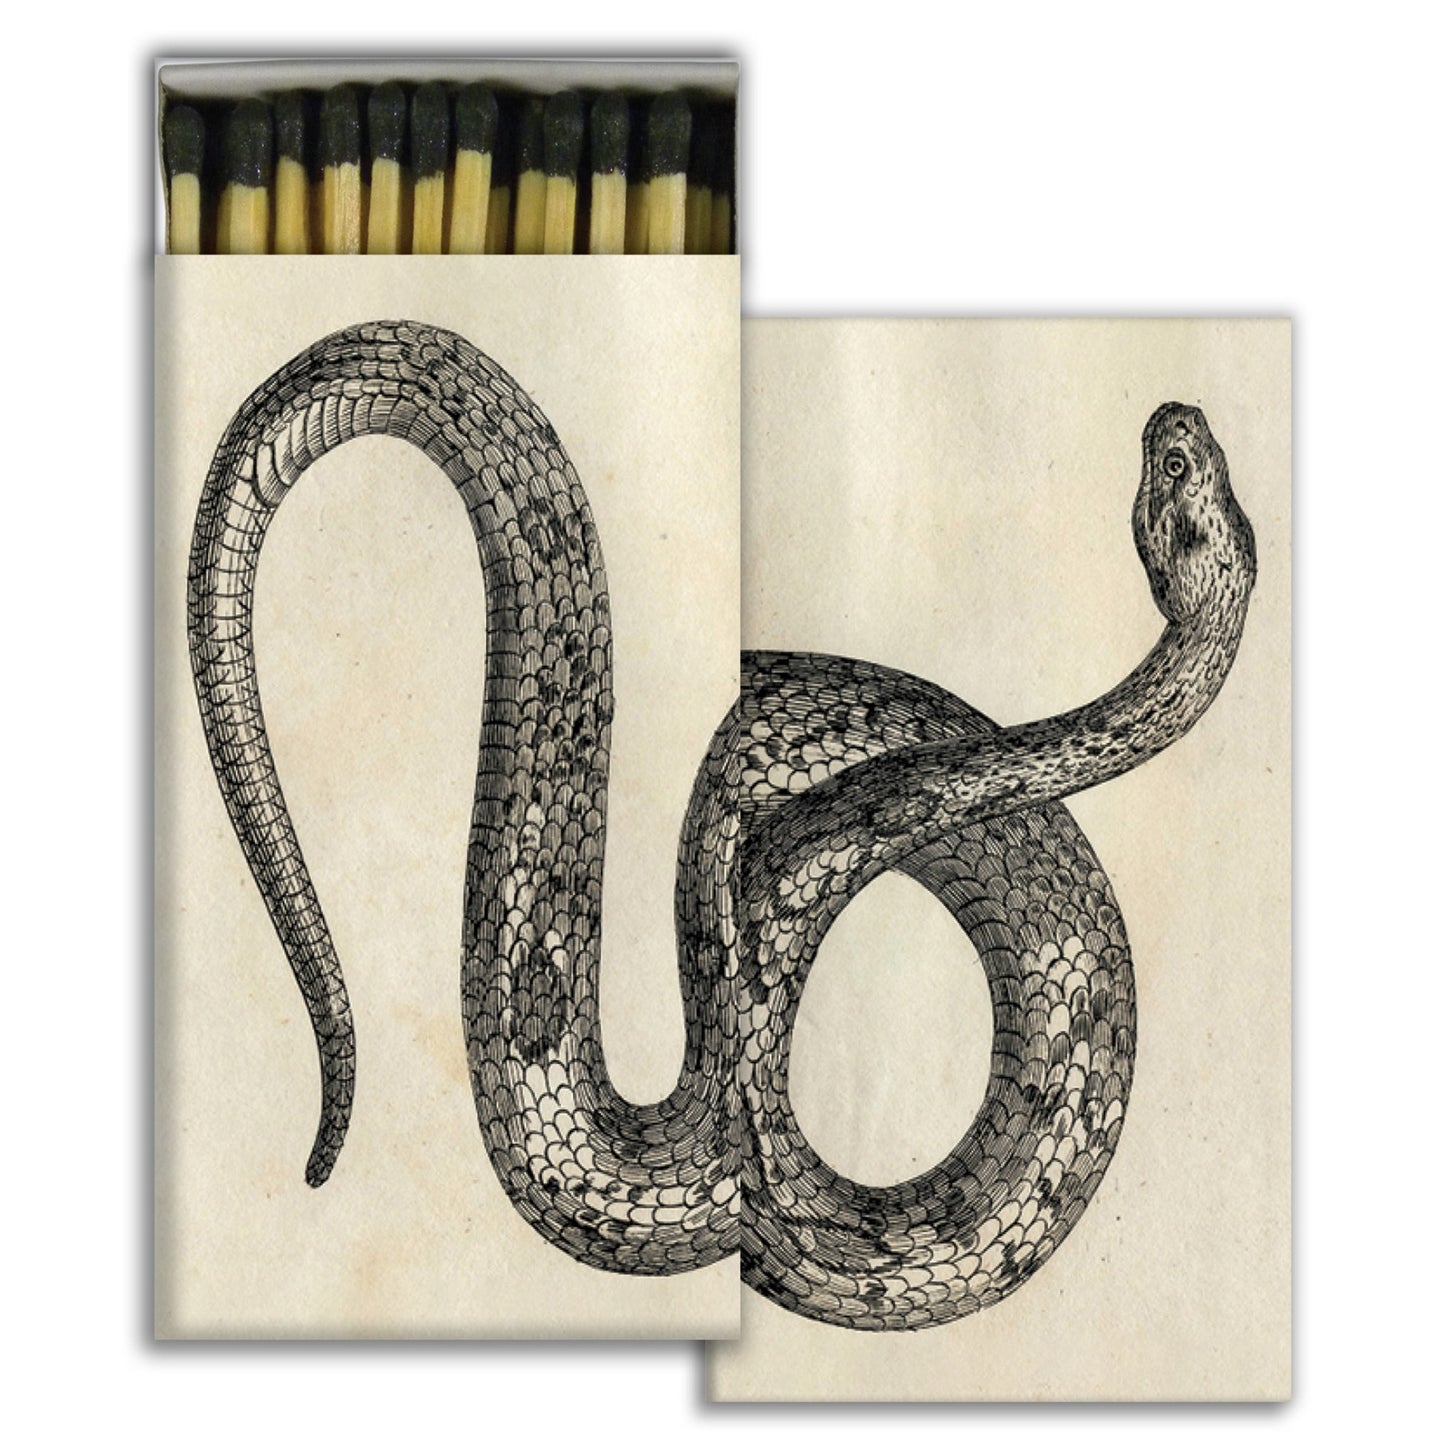 Box of matches with snake illustration.